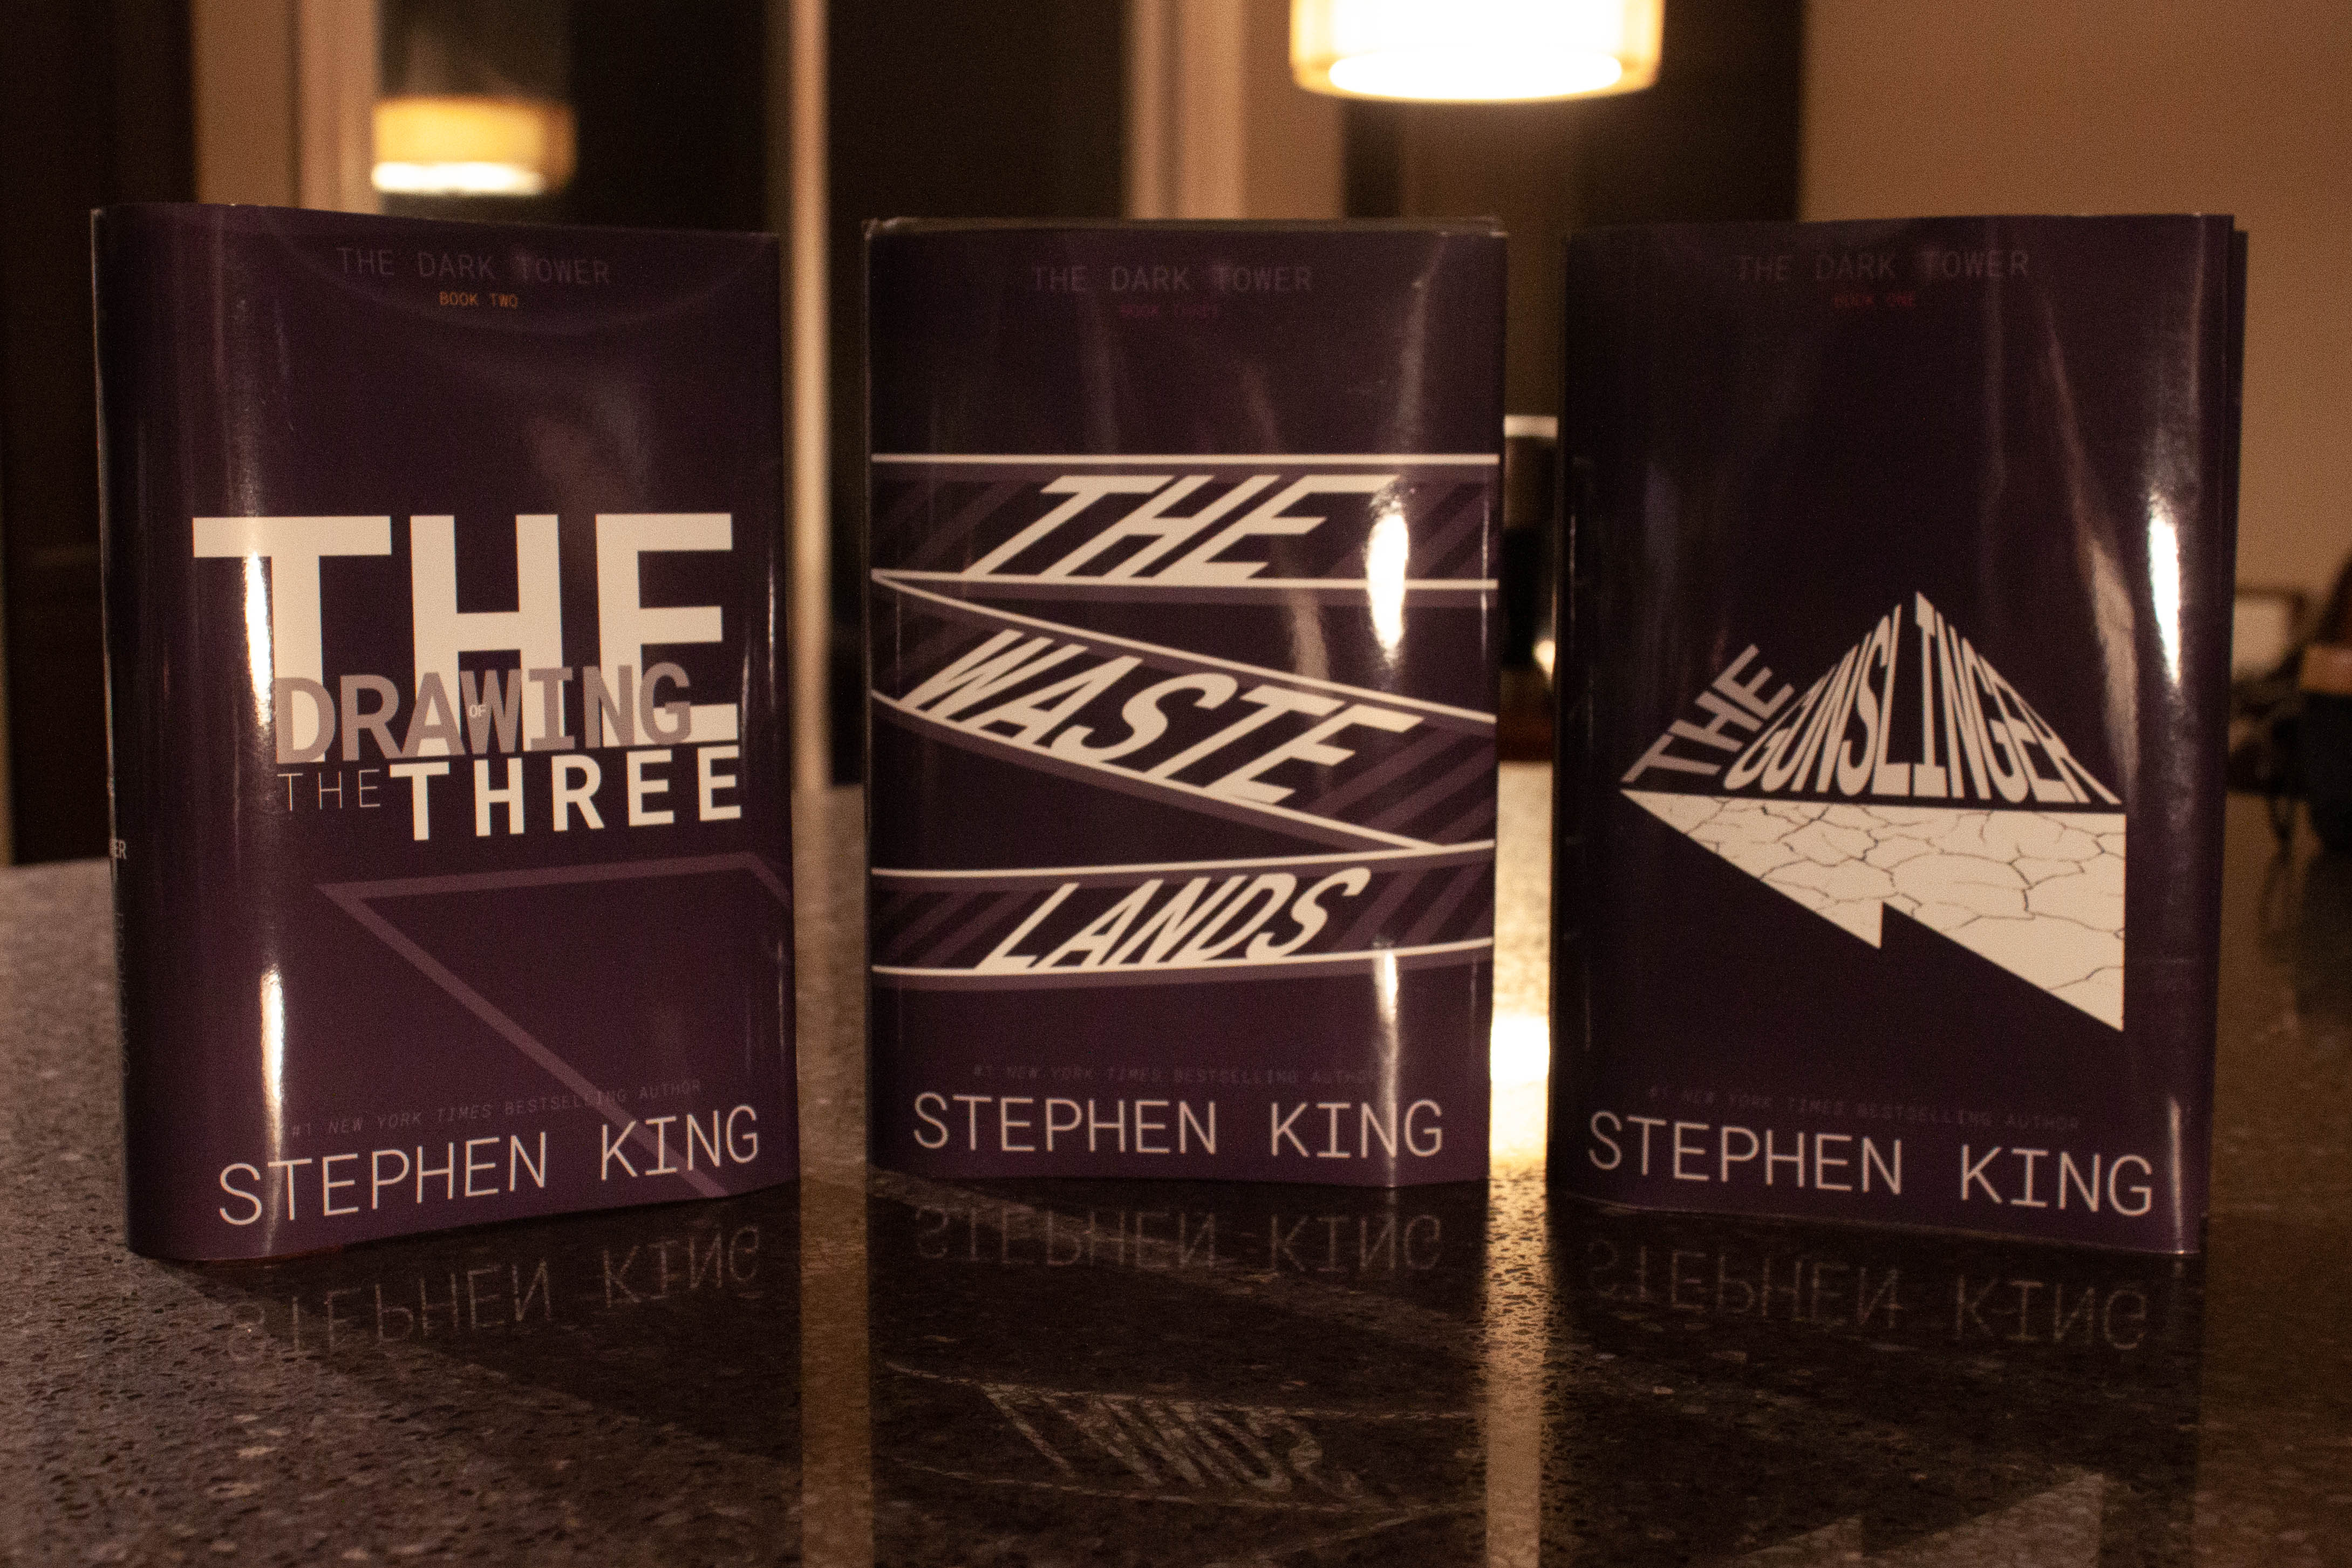 Book Serie's Cover Redesign